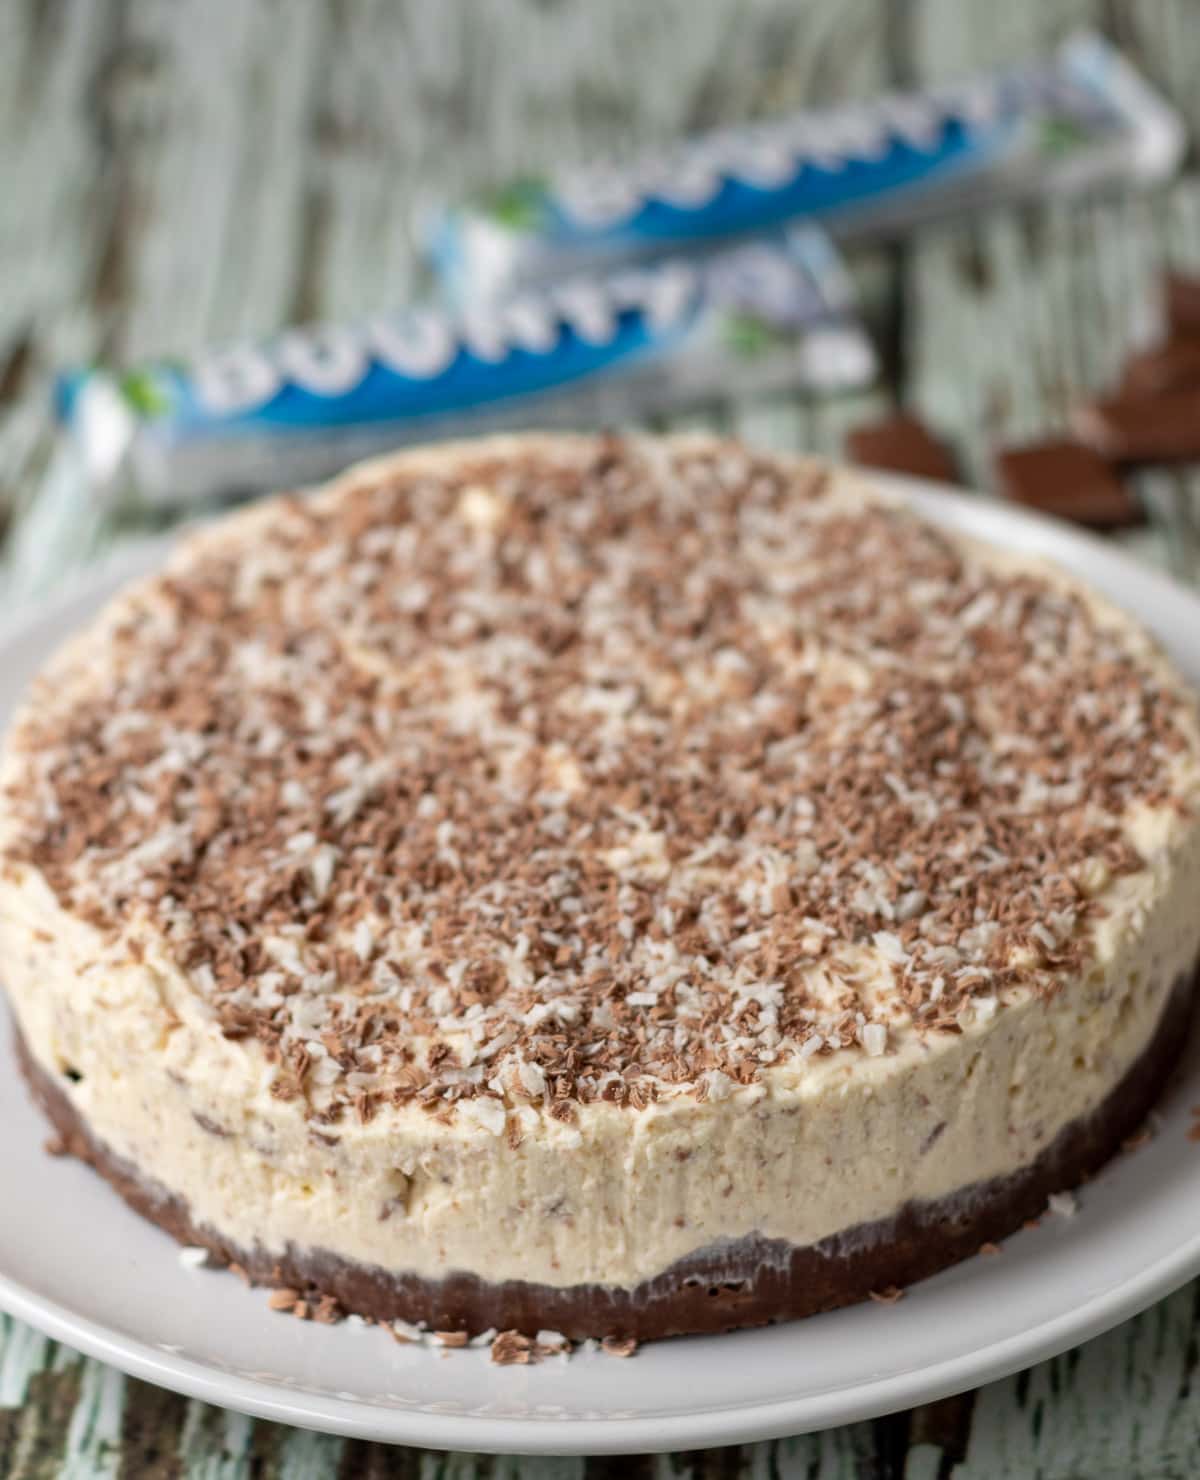 No-bake Bounty coconut cheesecake uncut sitting on a plate with unwrapped bounty bars in the background.